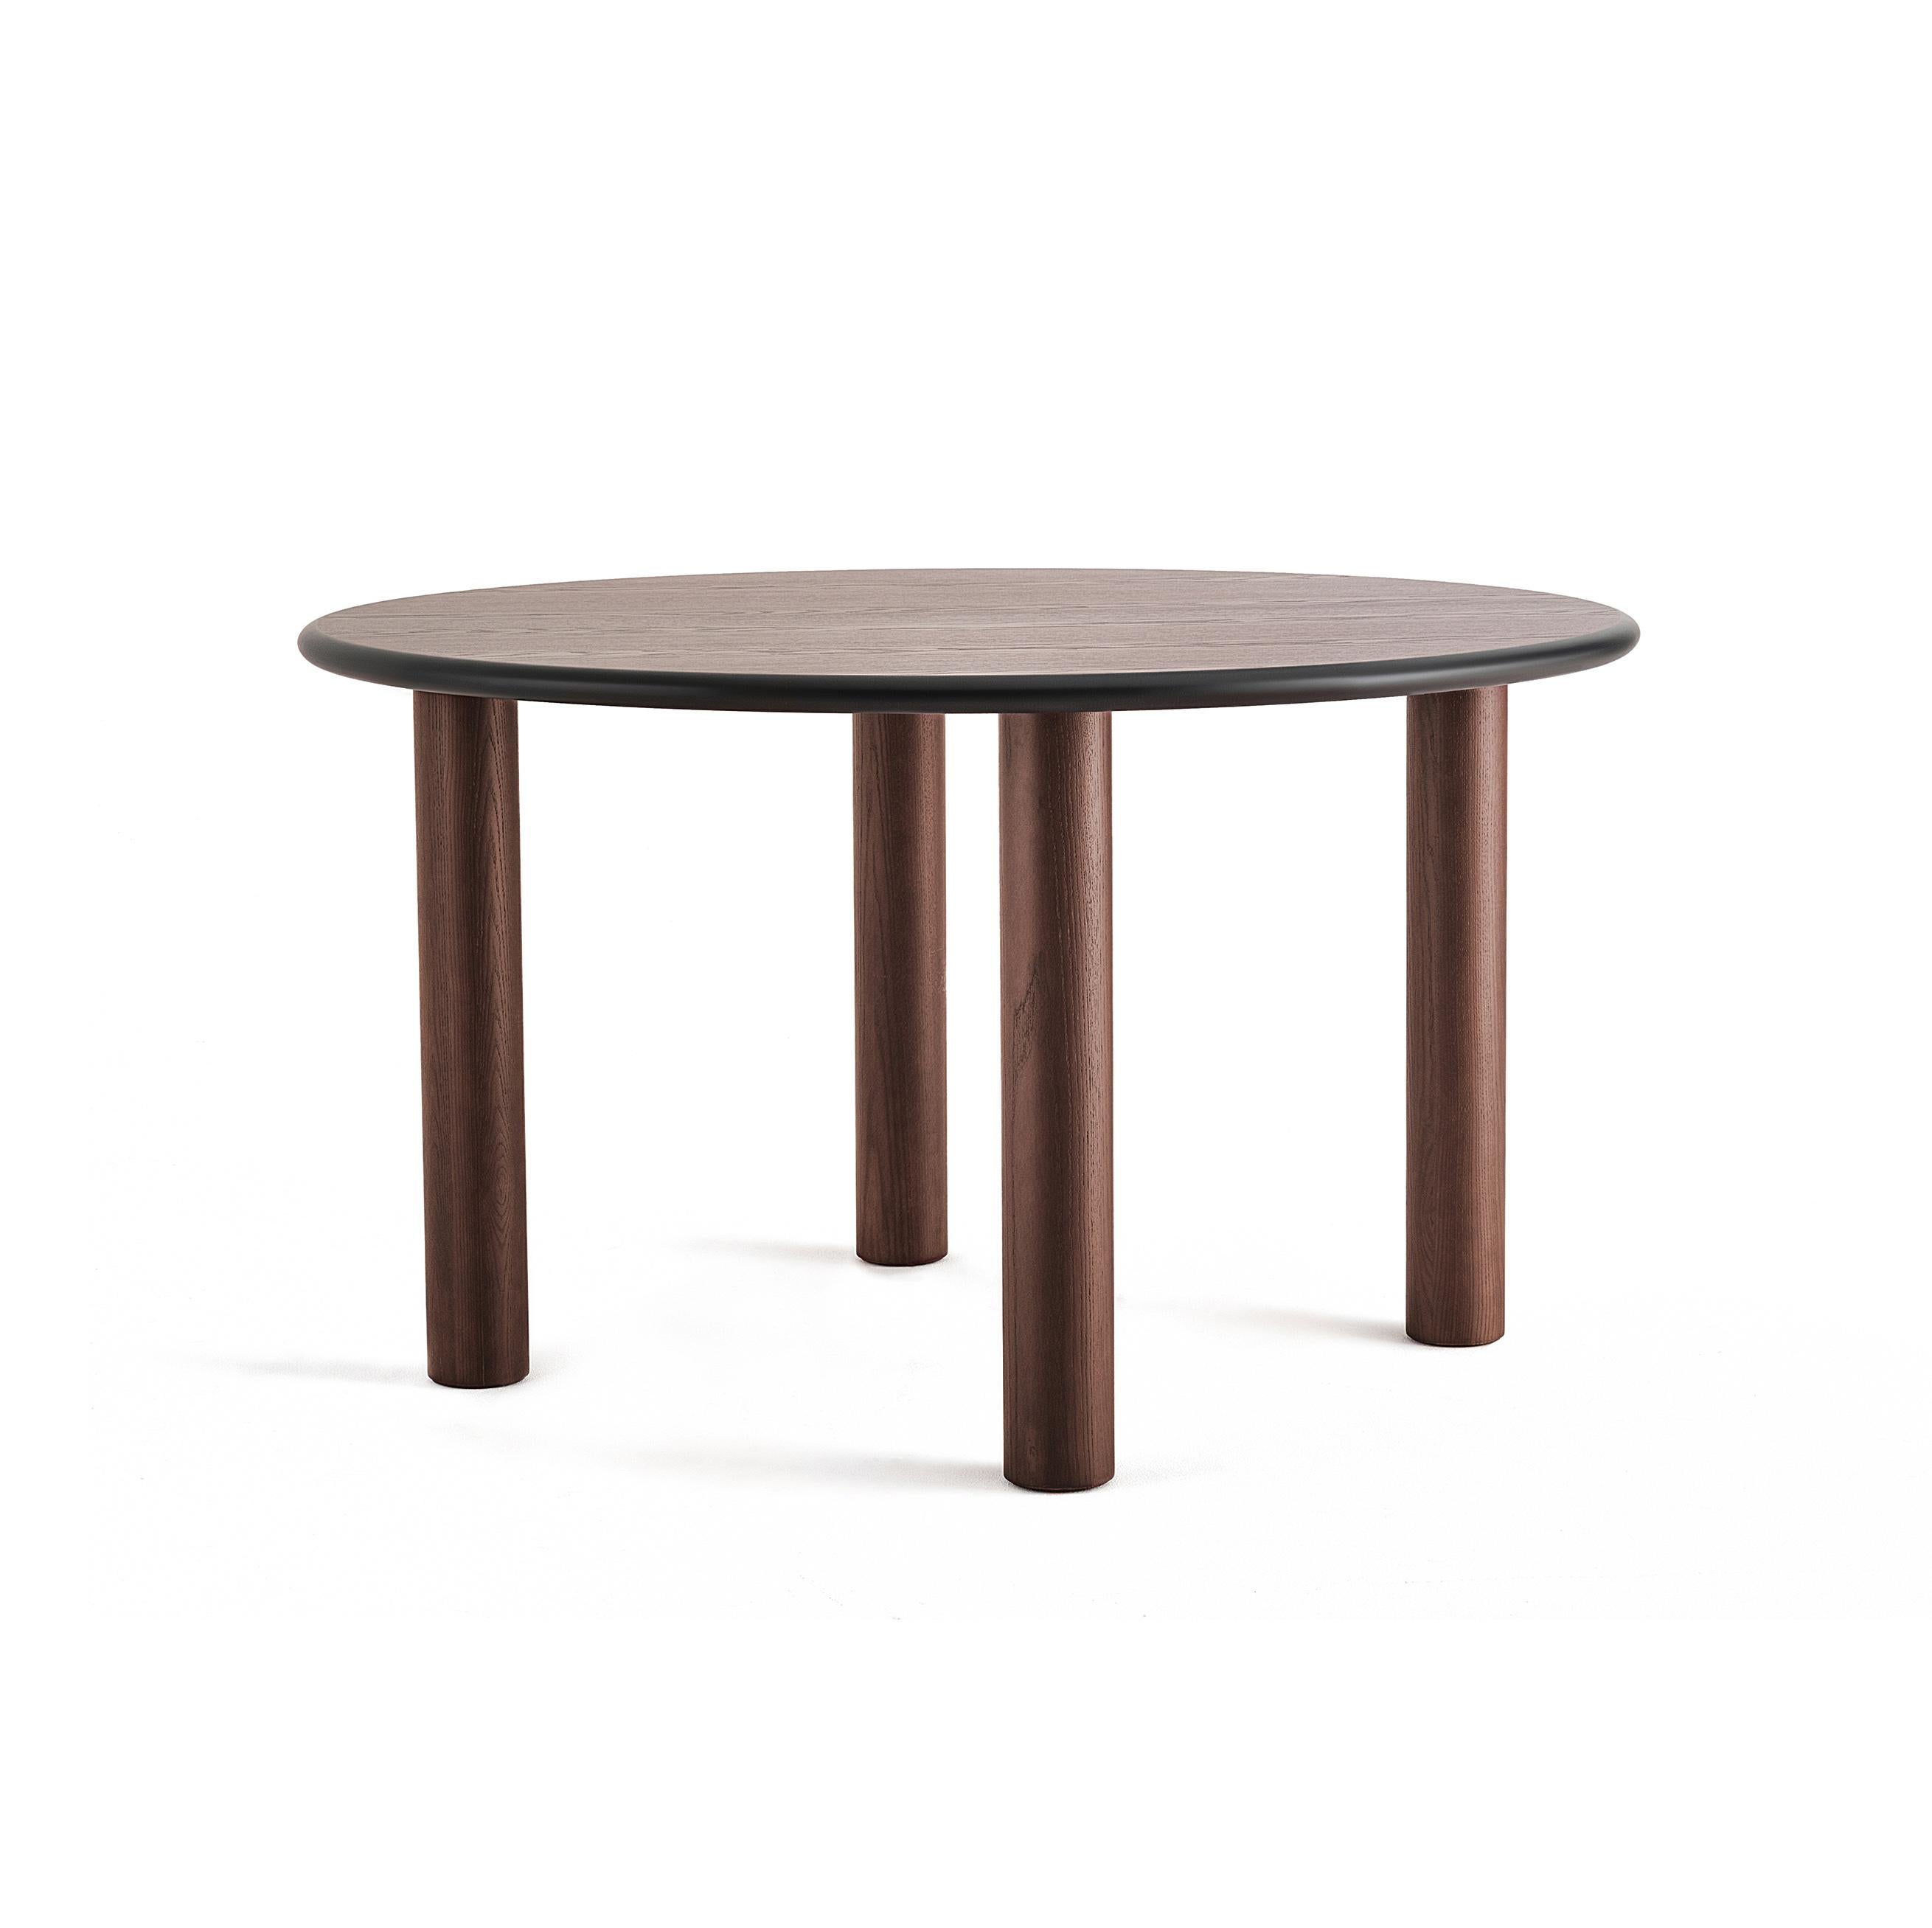 Organic Modern Contemporary Dining Round Table 'Paul' by Noom, Brown Stained, 180 cm For Sale